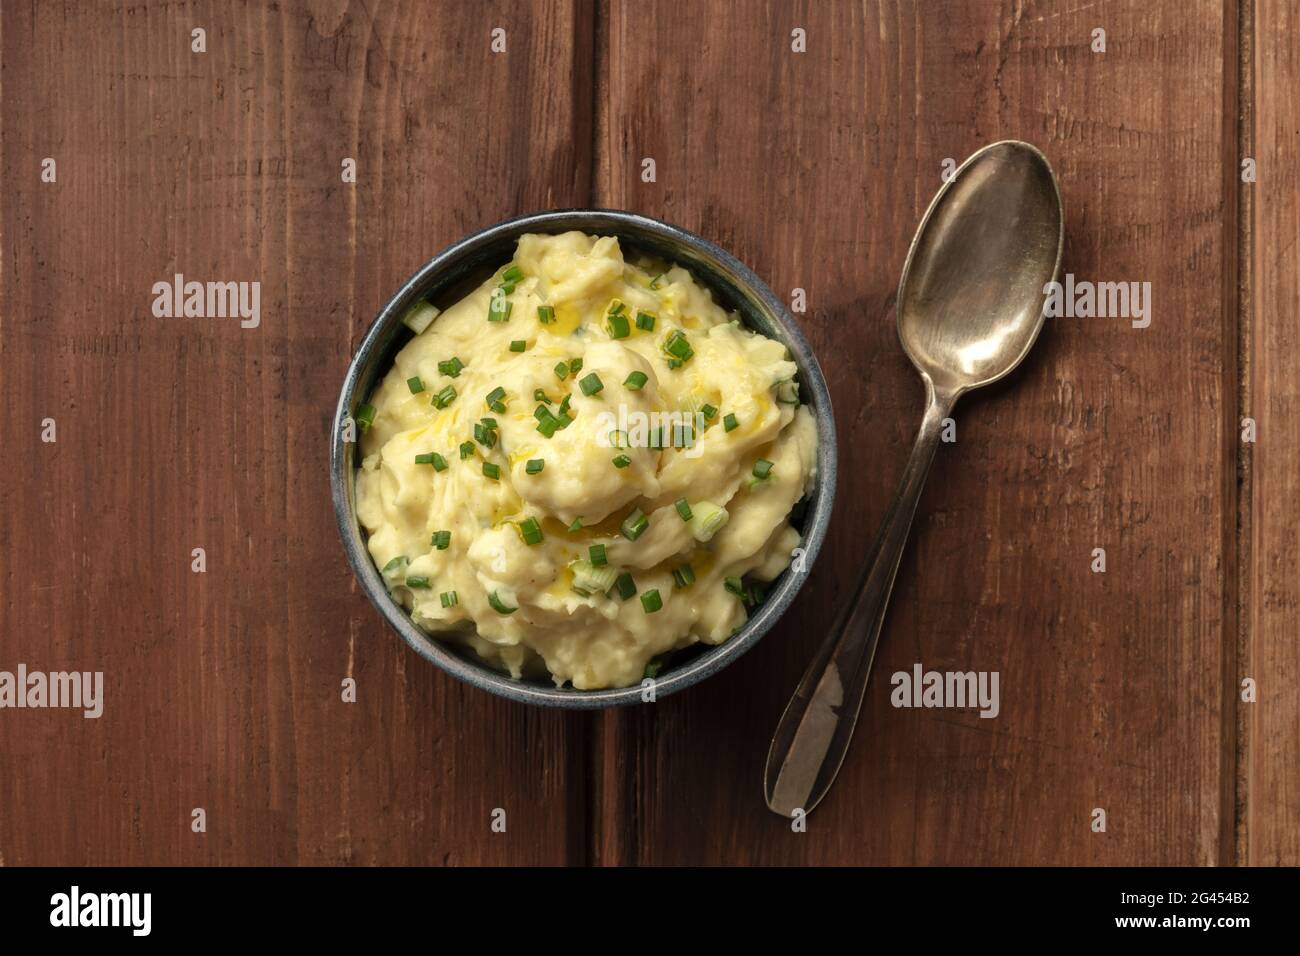 Pomme puree, a photo of a bowl of mashed potatoes with herbs, shot from the top Stock Photo